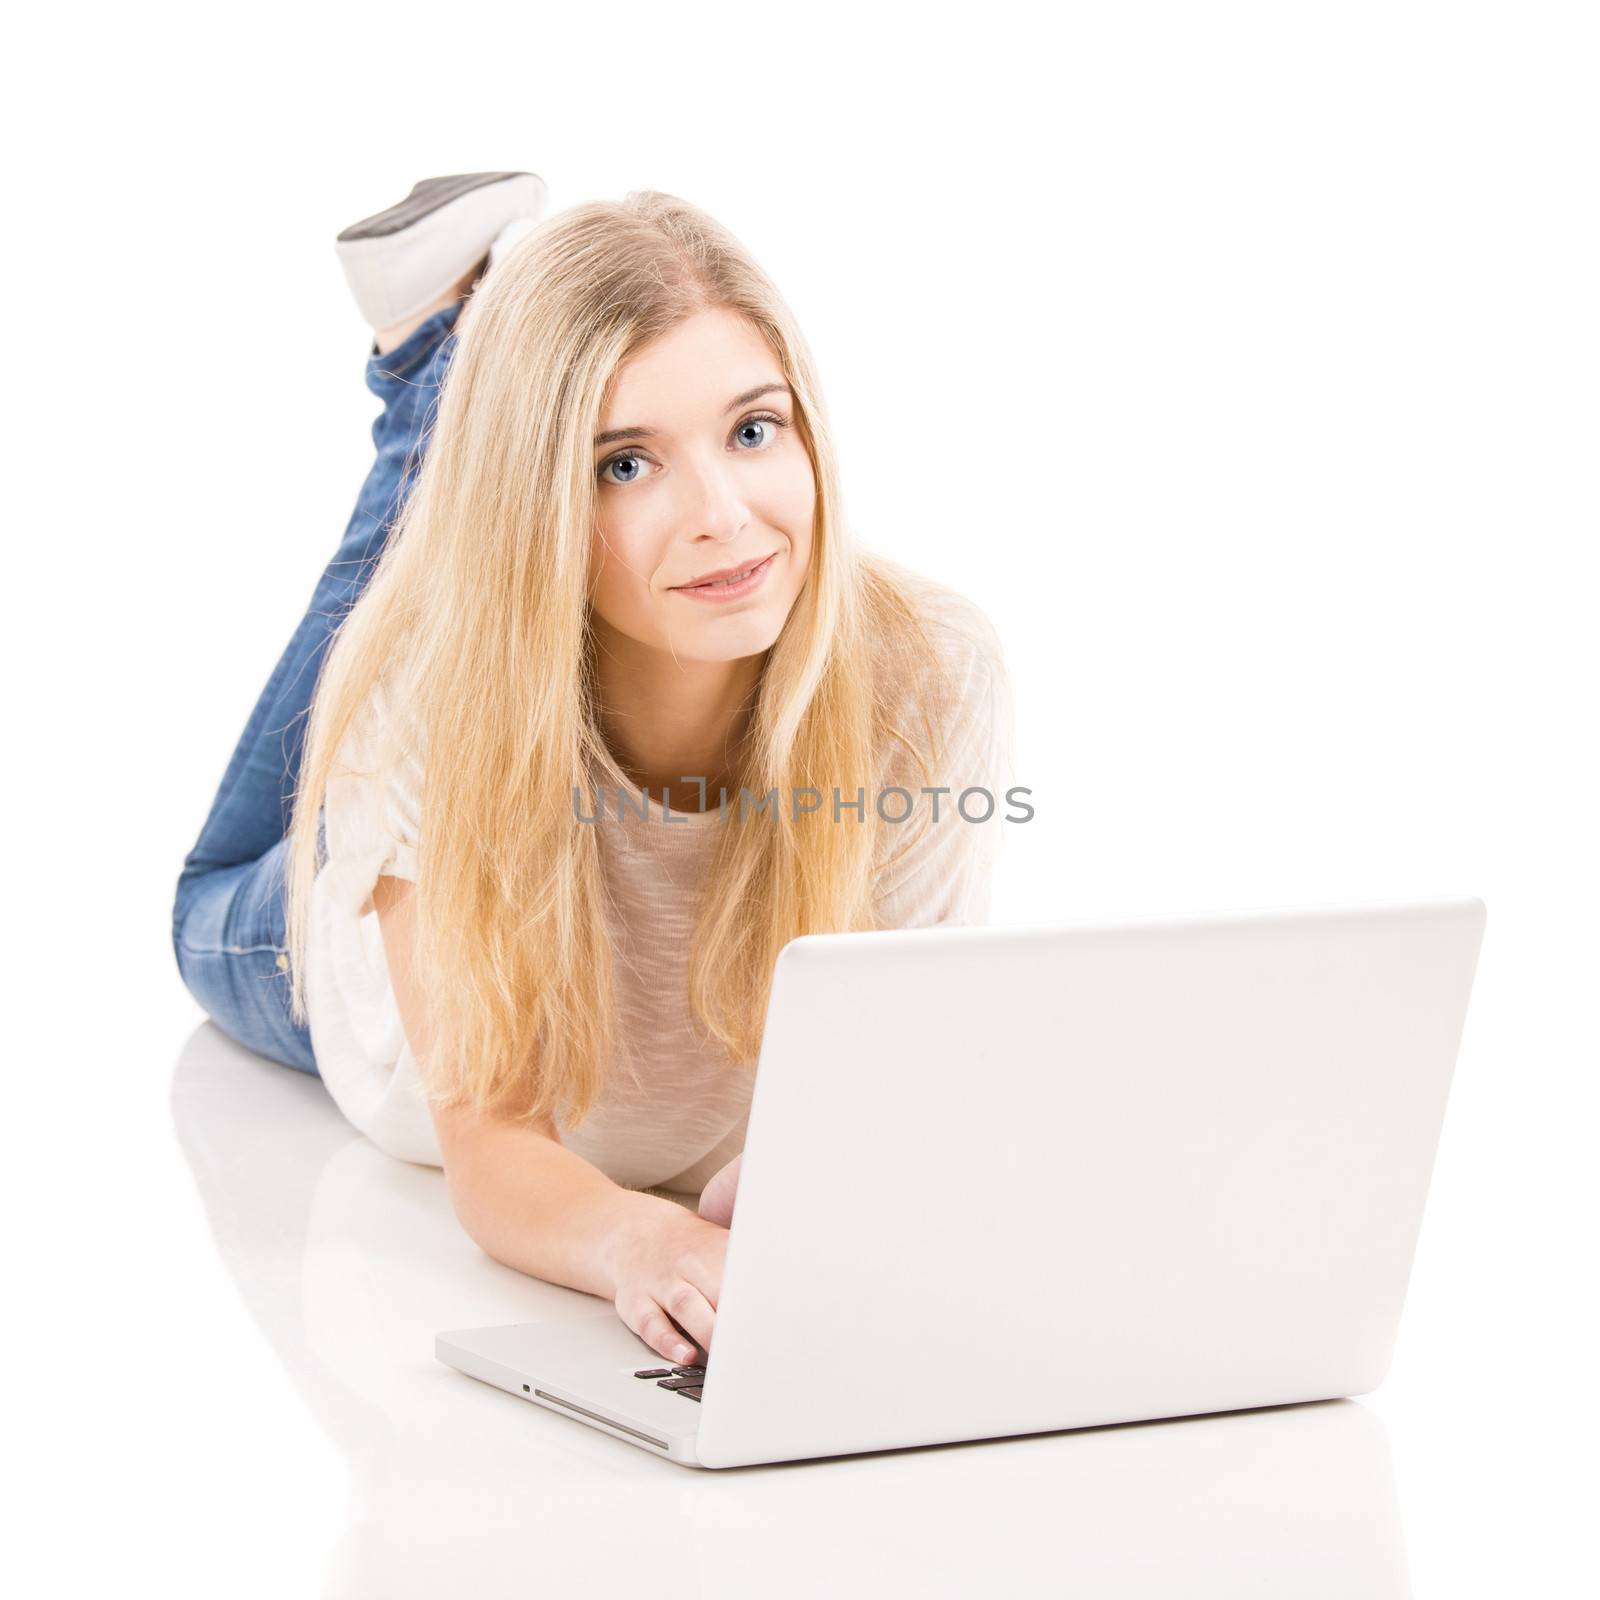 Beautiful woman lying on the floor and working with a laptop, isolated over white background